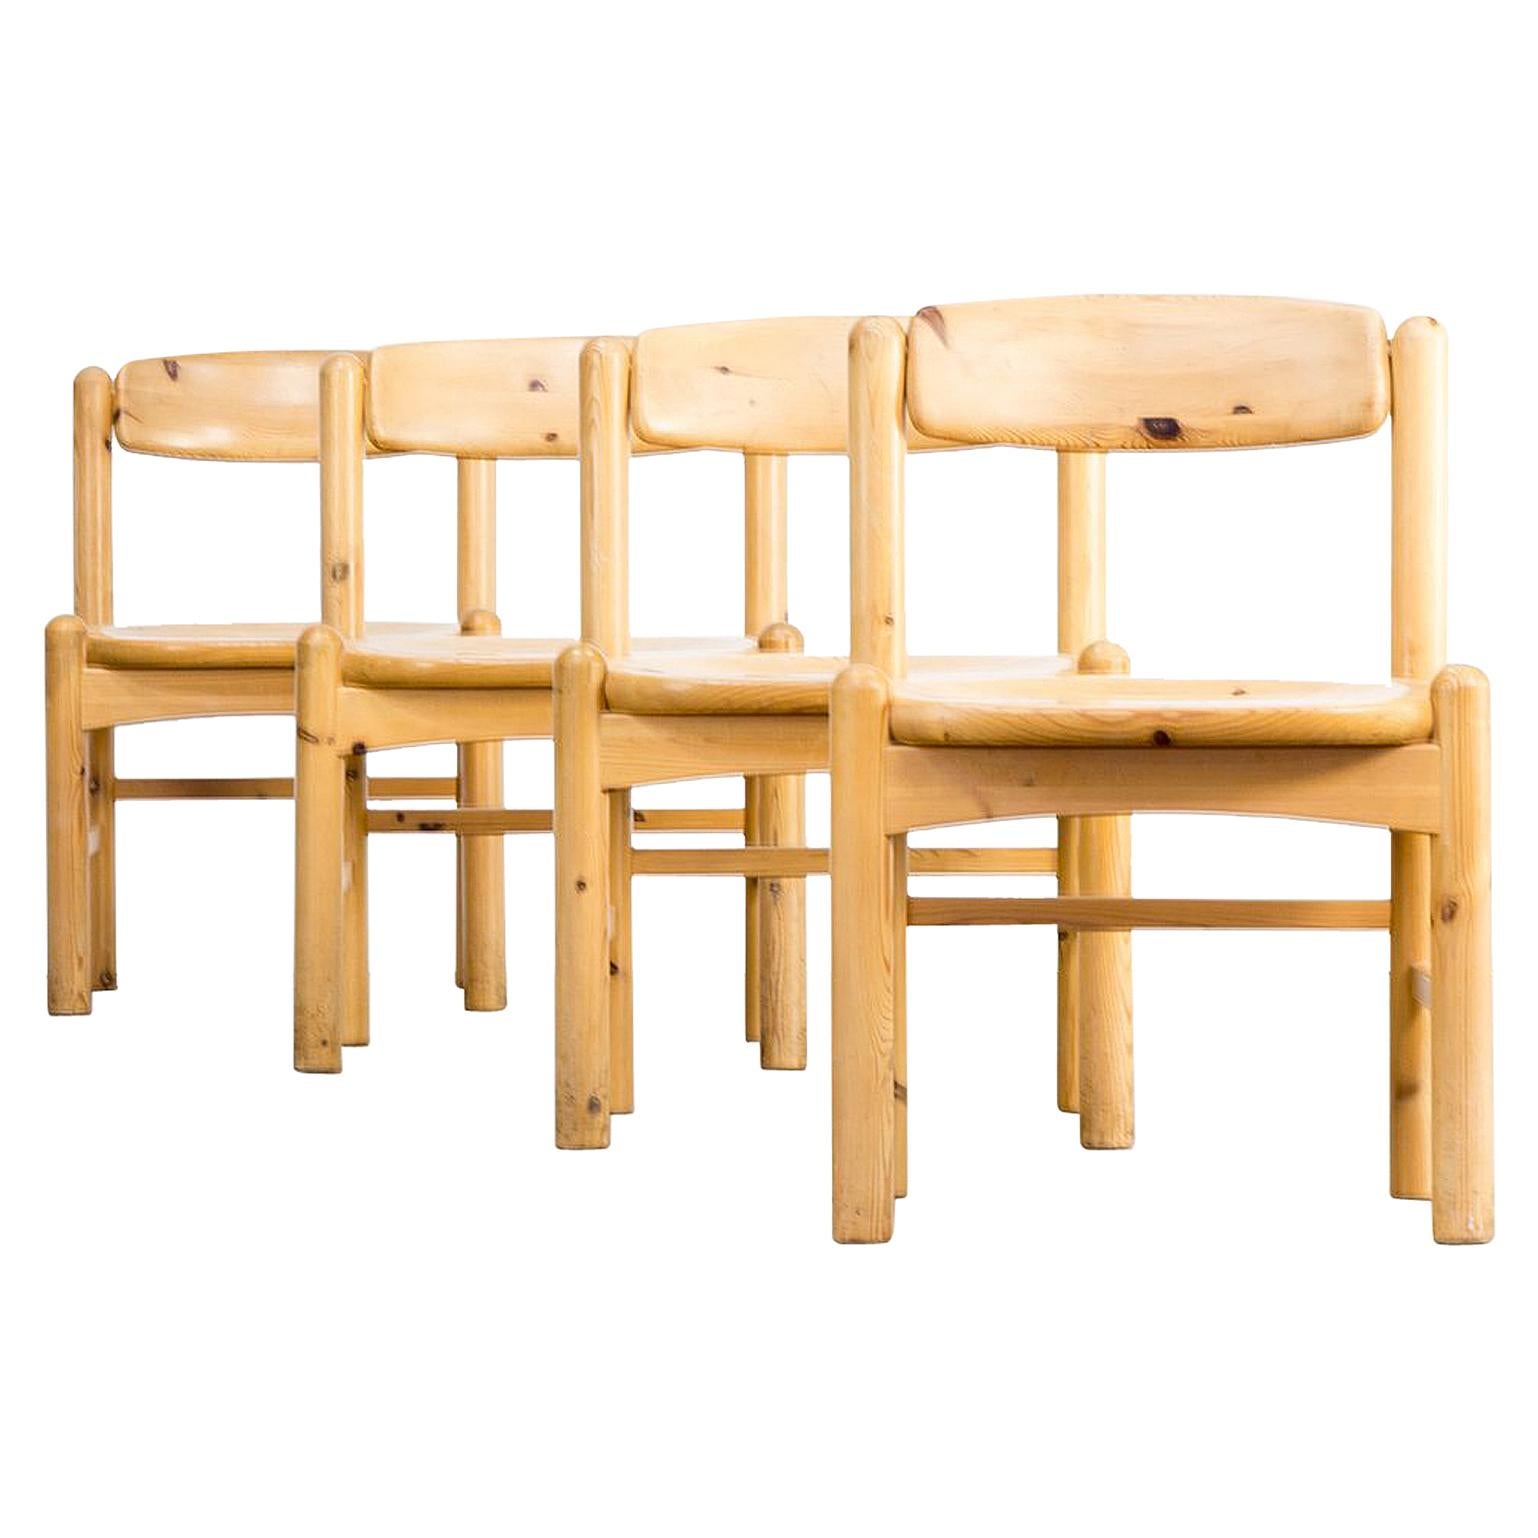 1960s Rainer Daumiller Pine Wood Dining Chair Set of 4 For Sale